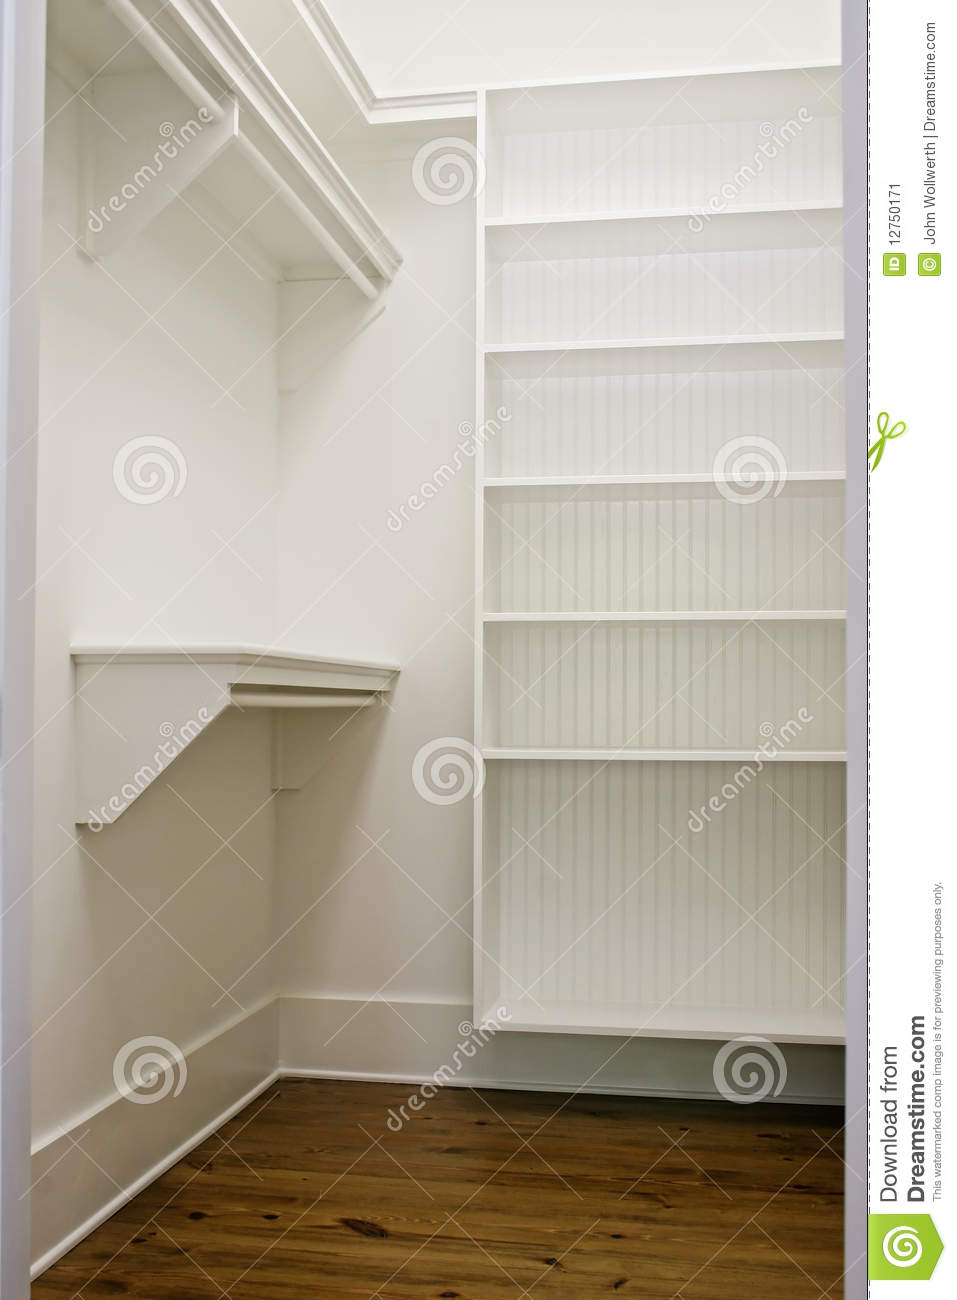 Large White Empty Walk In Closet With Shelves